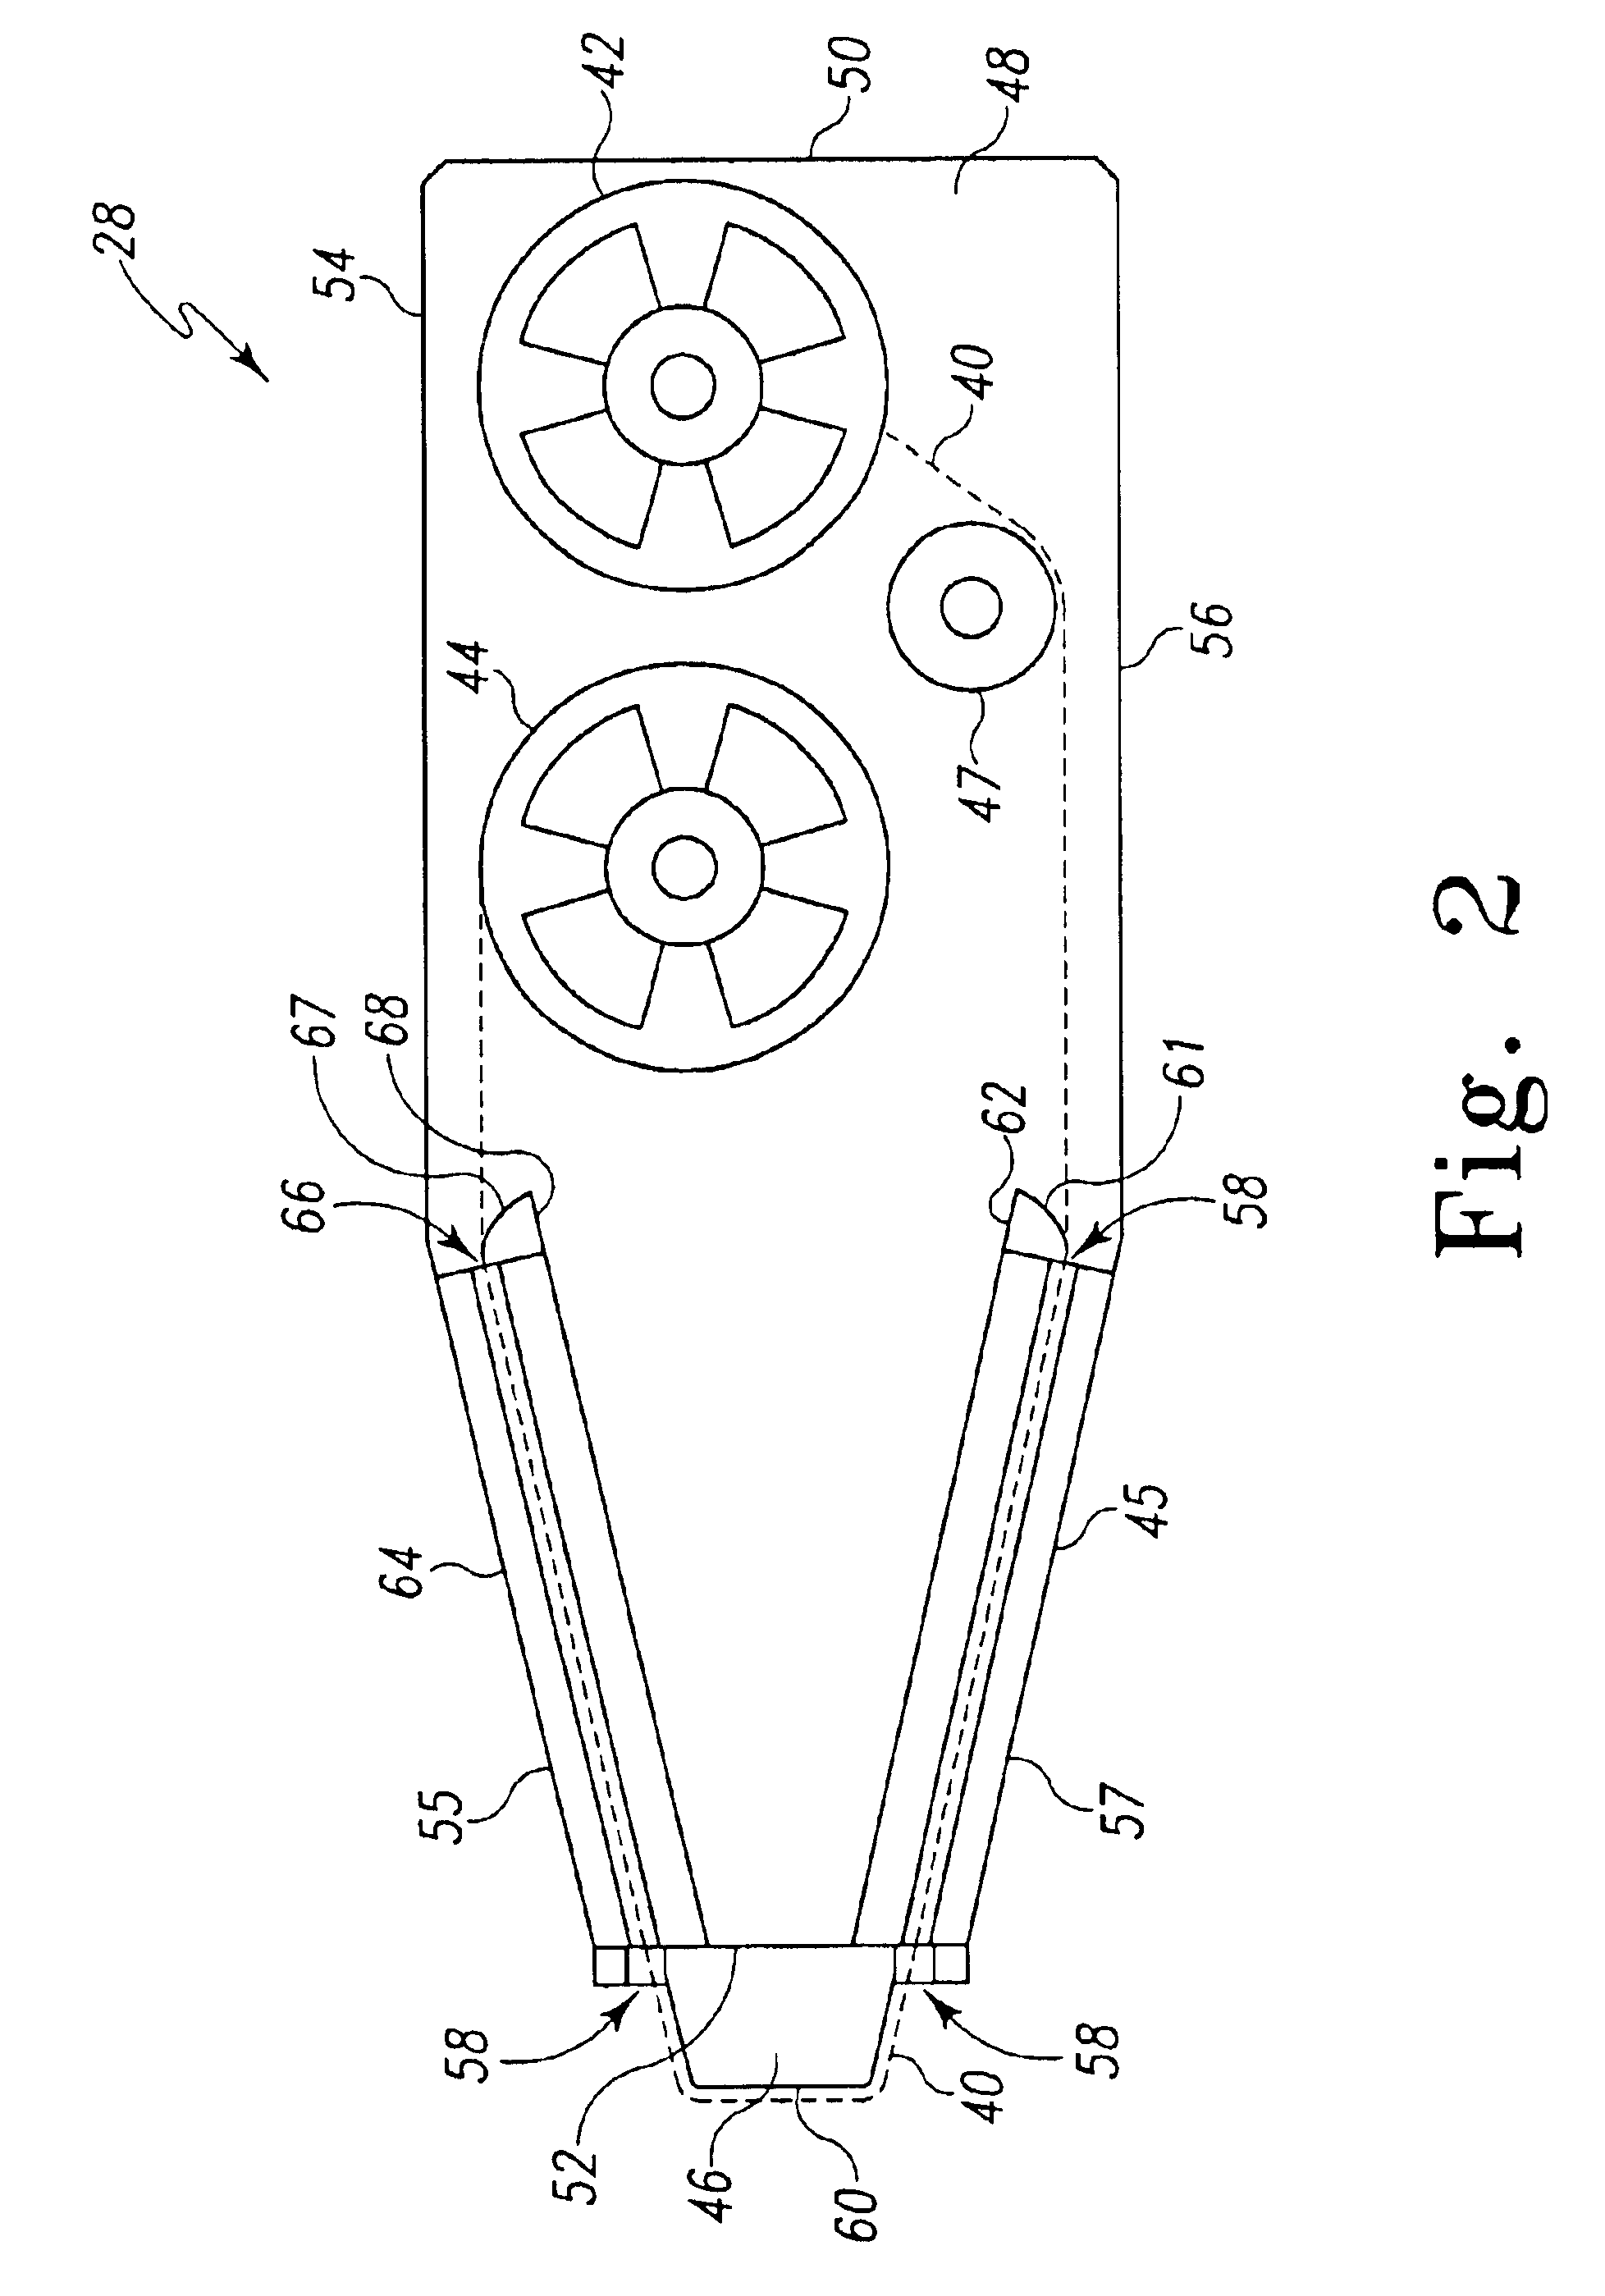 Method and apparatus for mass spectrometric analysis of samples